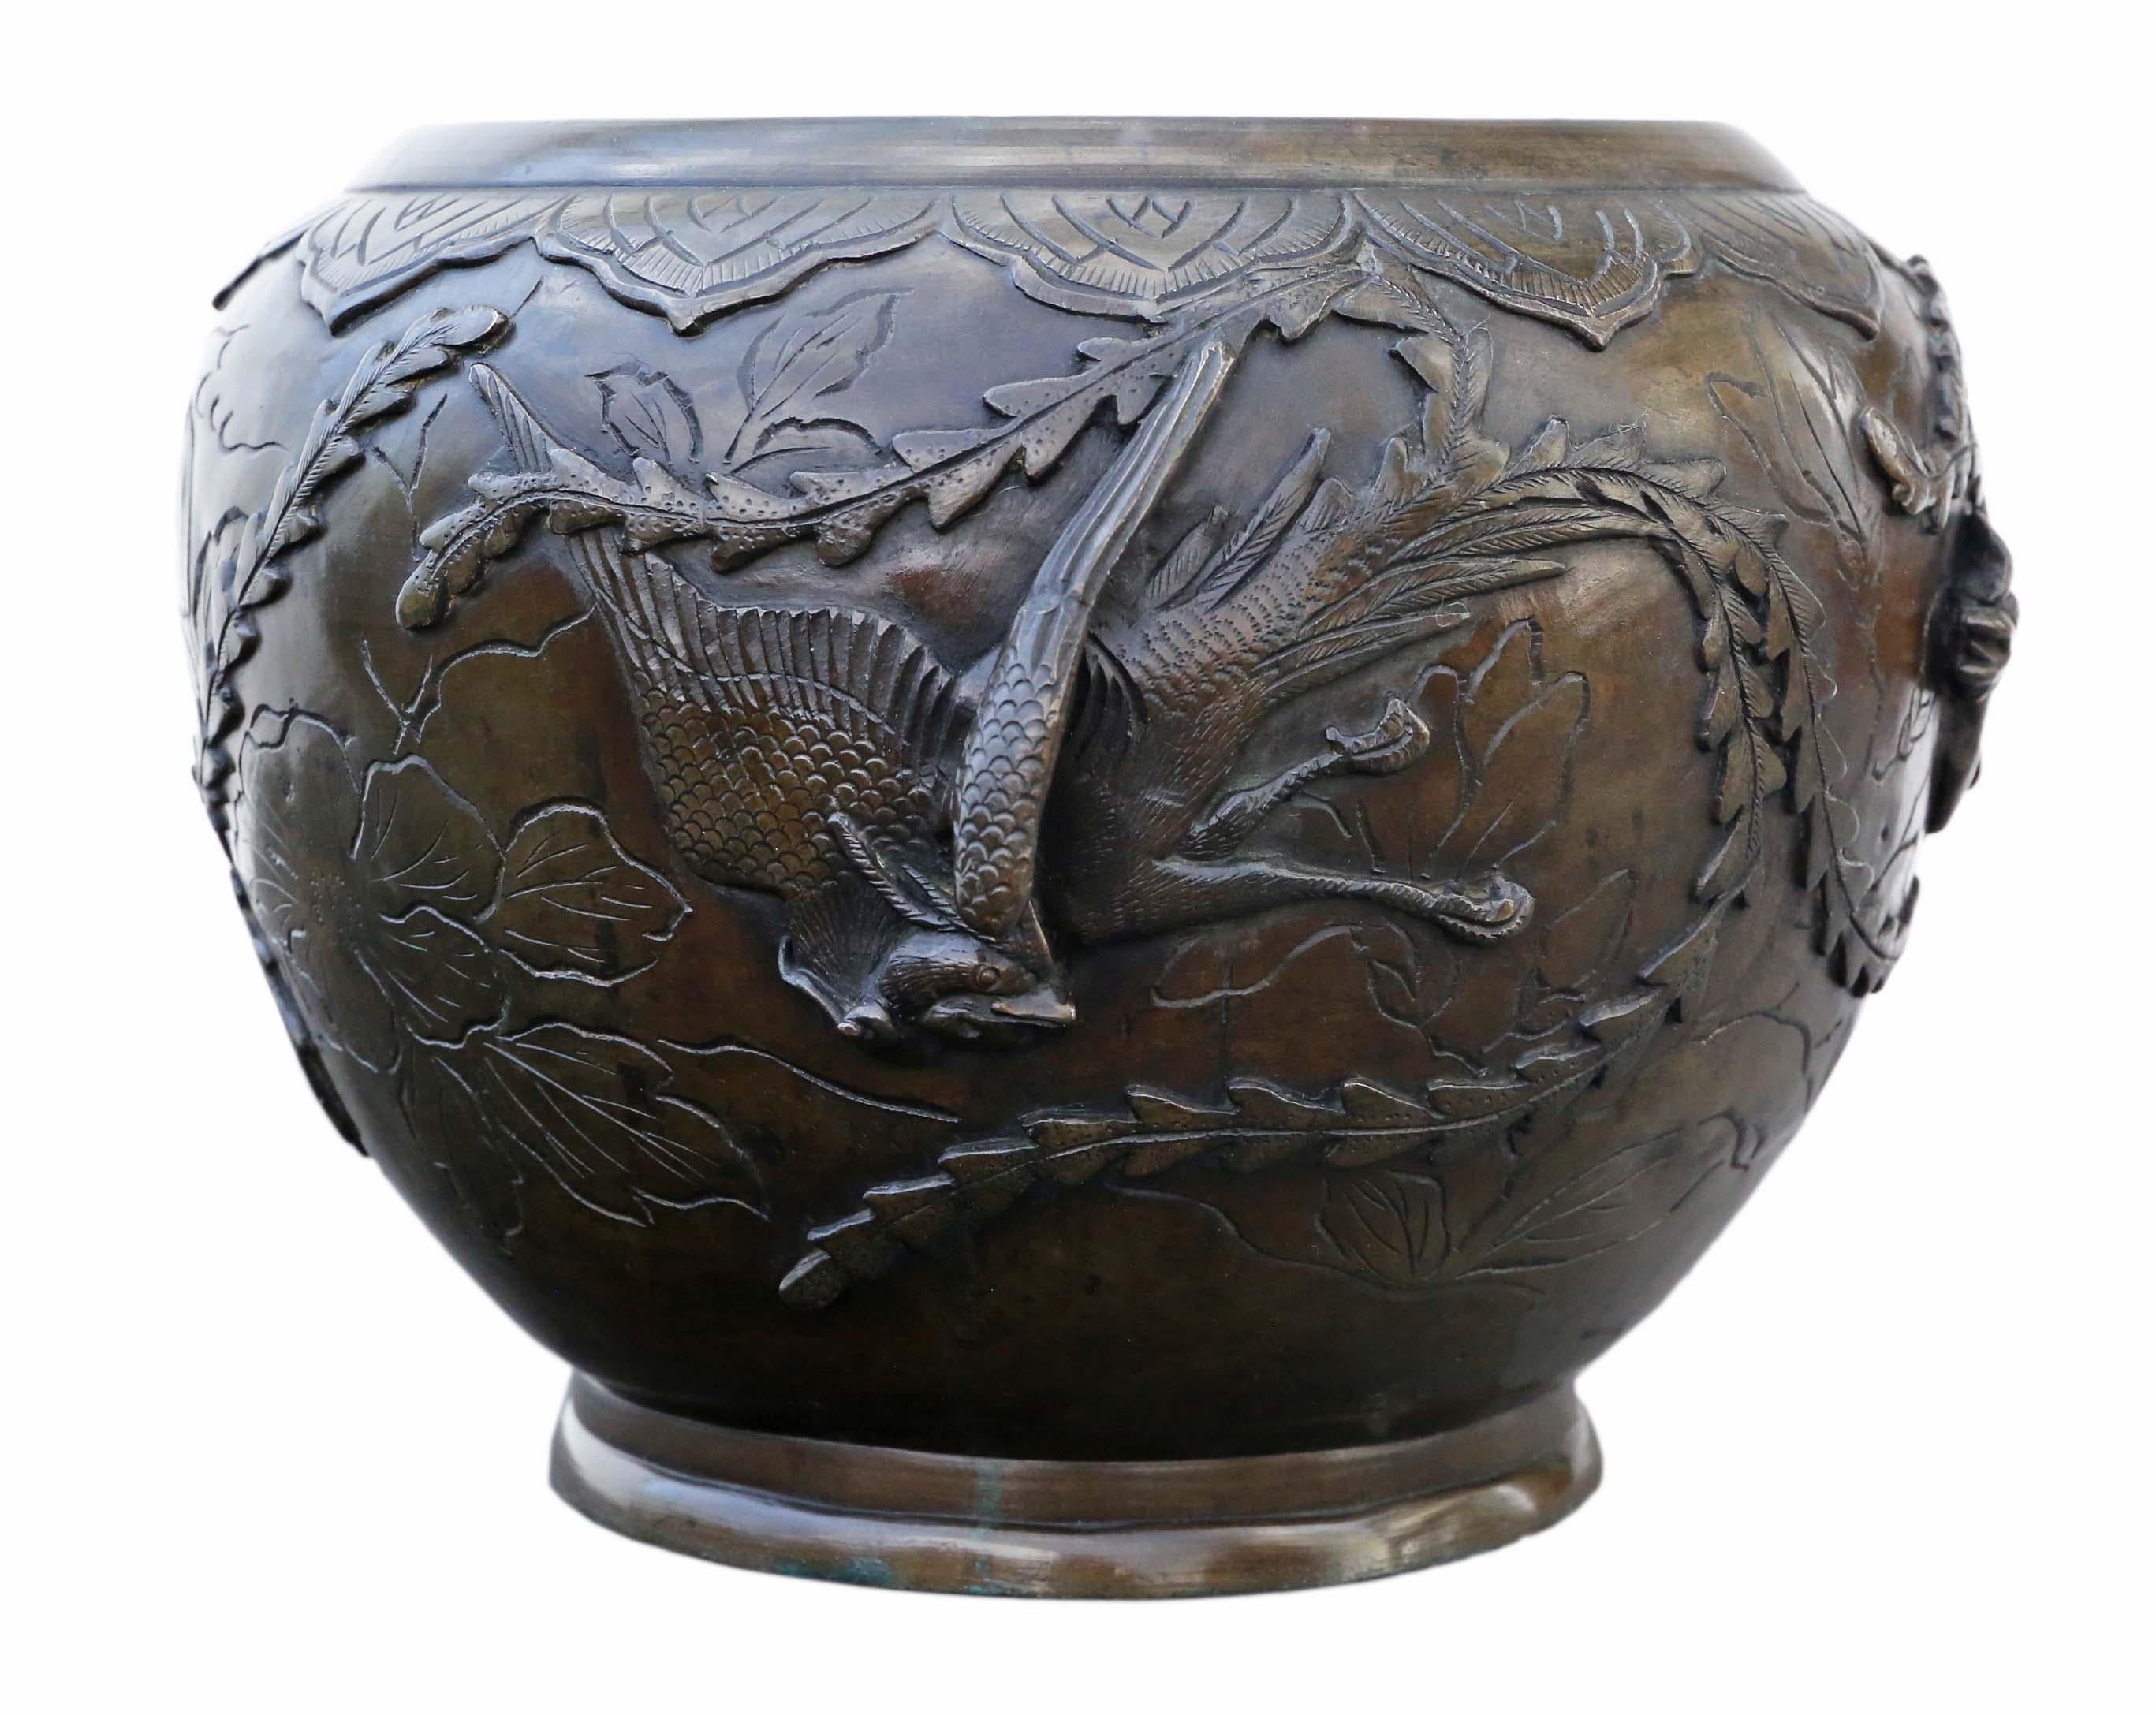 Antique large fine quality Oriental Japanese bronze Jardinière planter bowl censor Meiji Period 19th Century.

Would look amazing in the right location and make a fabulous centre piece. Great colour and patina.

Overall maximum dimensions: 26cm